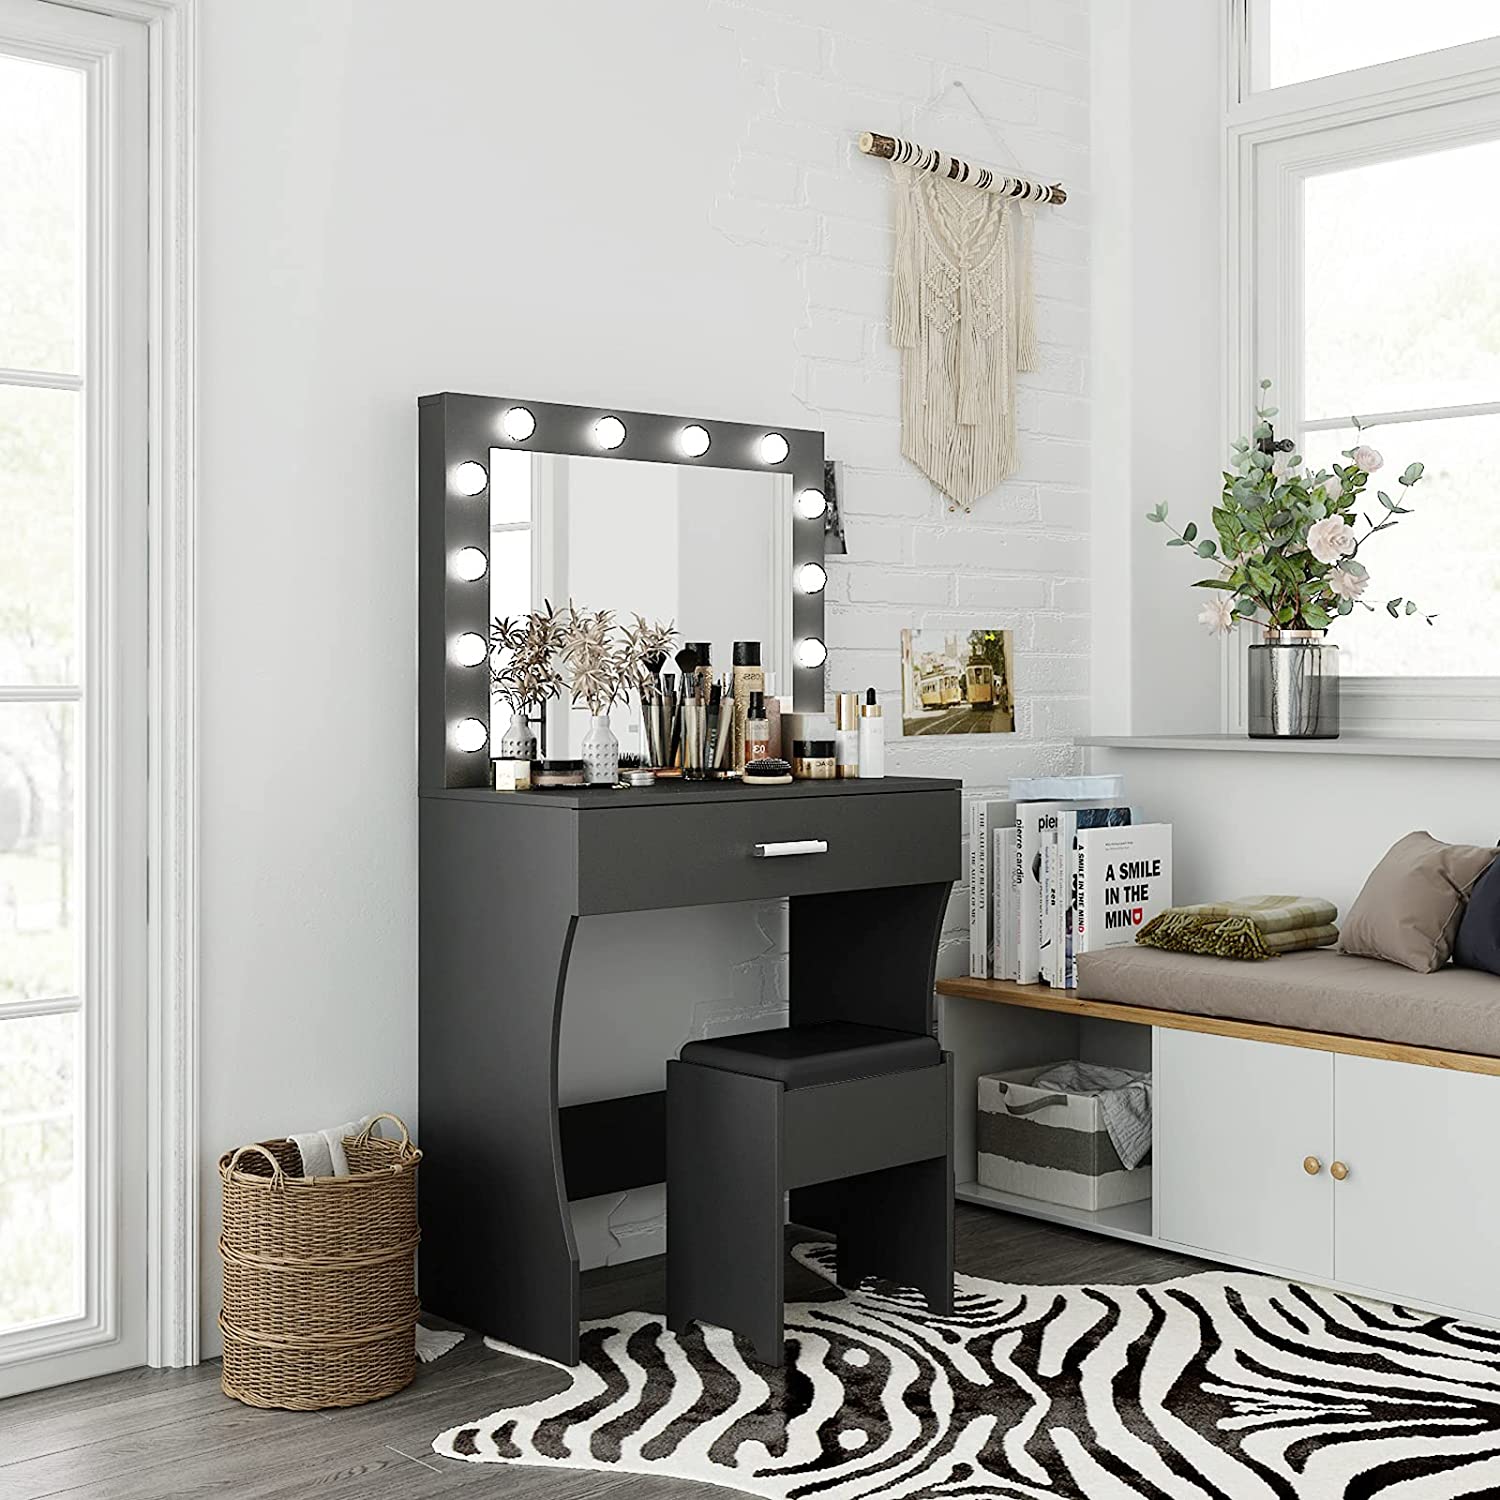 Vanity Table Set with Lighted Mirror Home Office Garden | HOG-HomeOfficeGarden | online marketplace